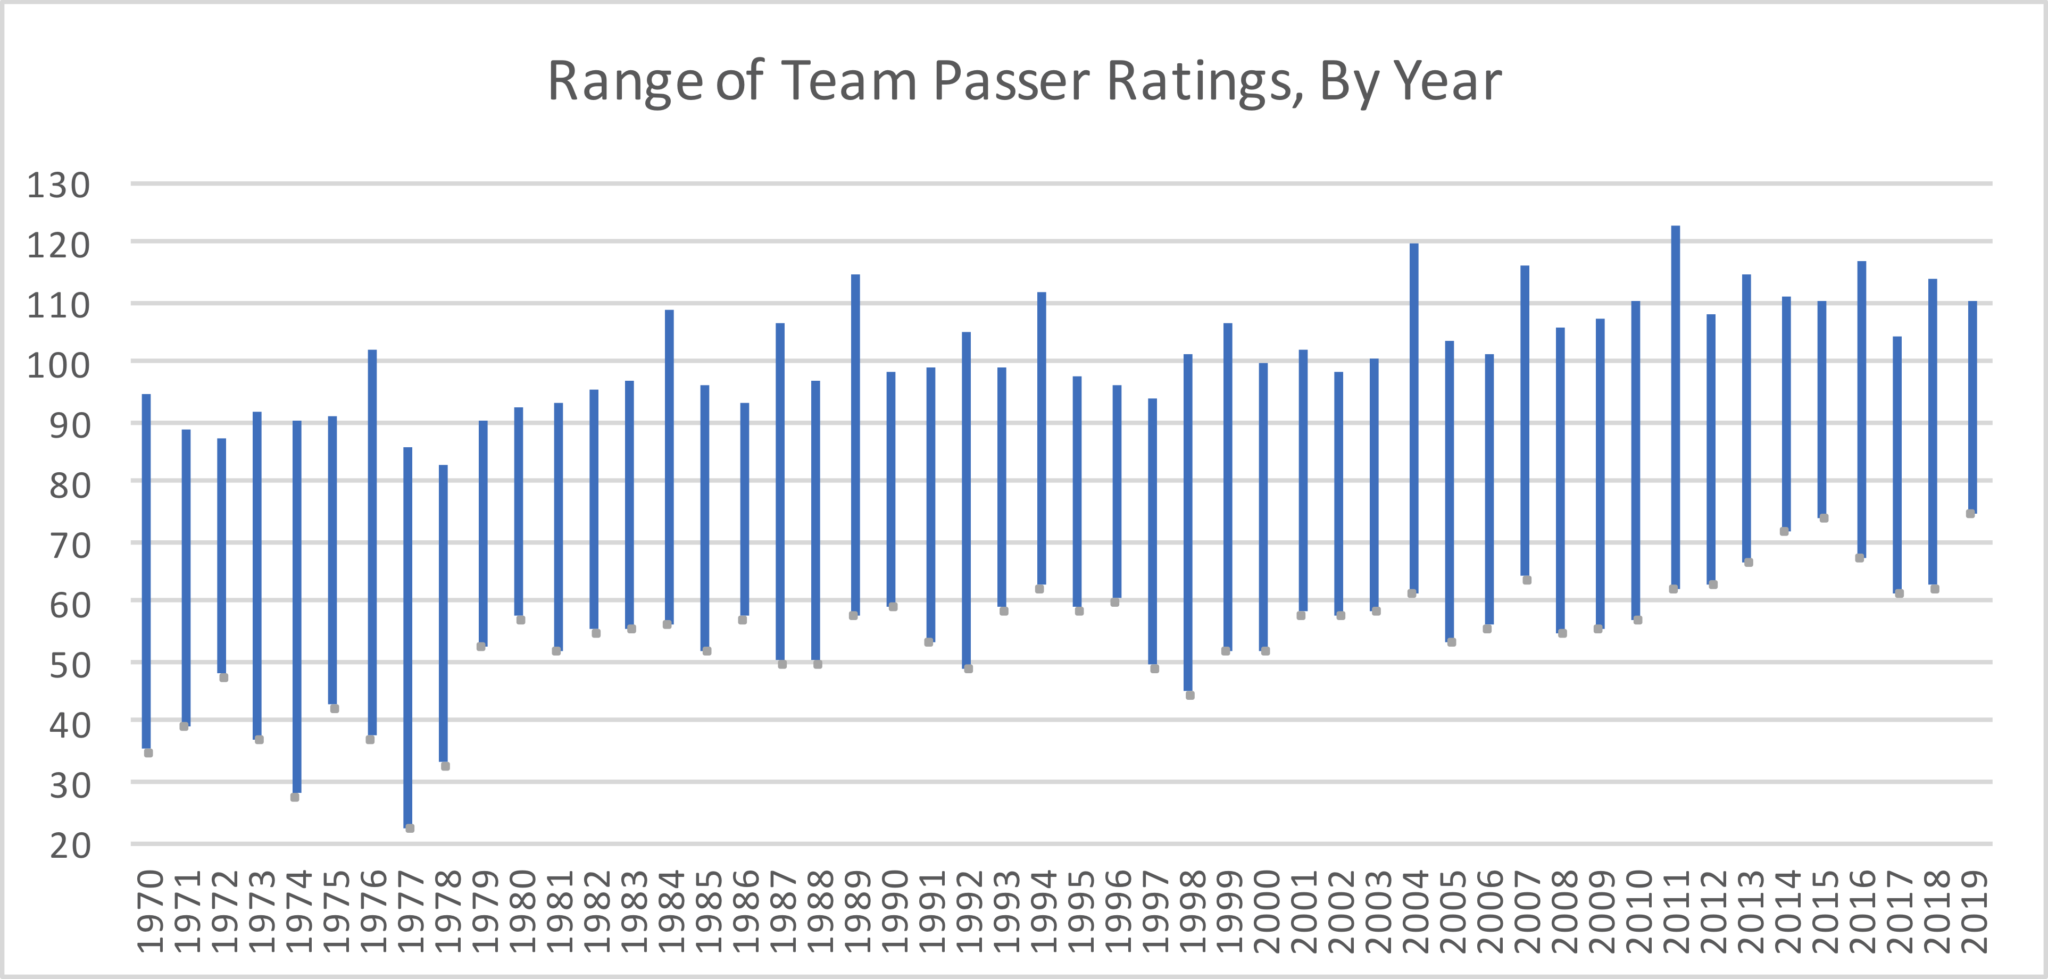 The Range Of Passer Ratings Is Getting Smaller